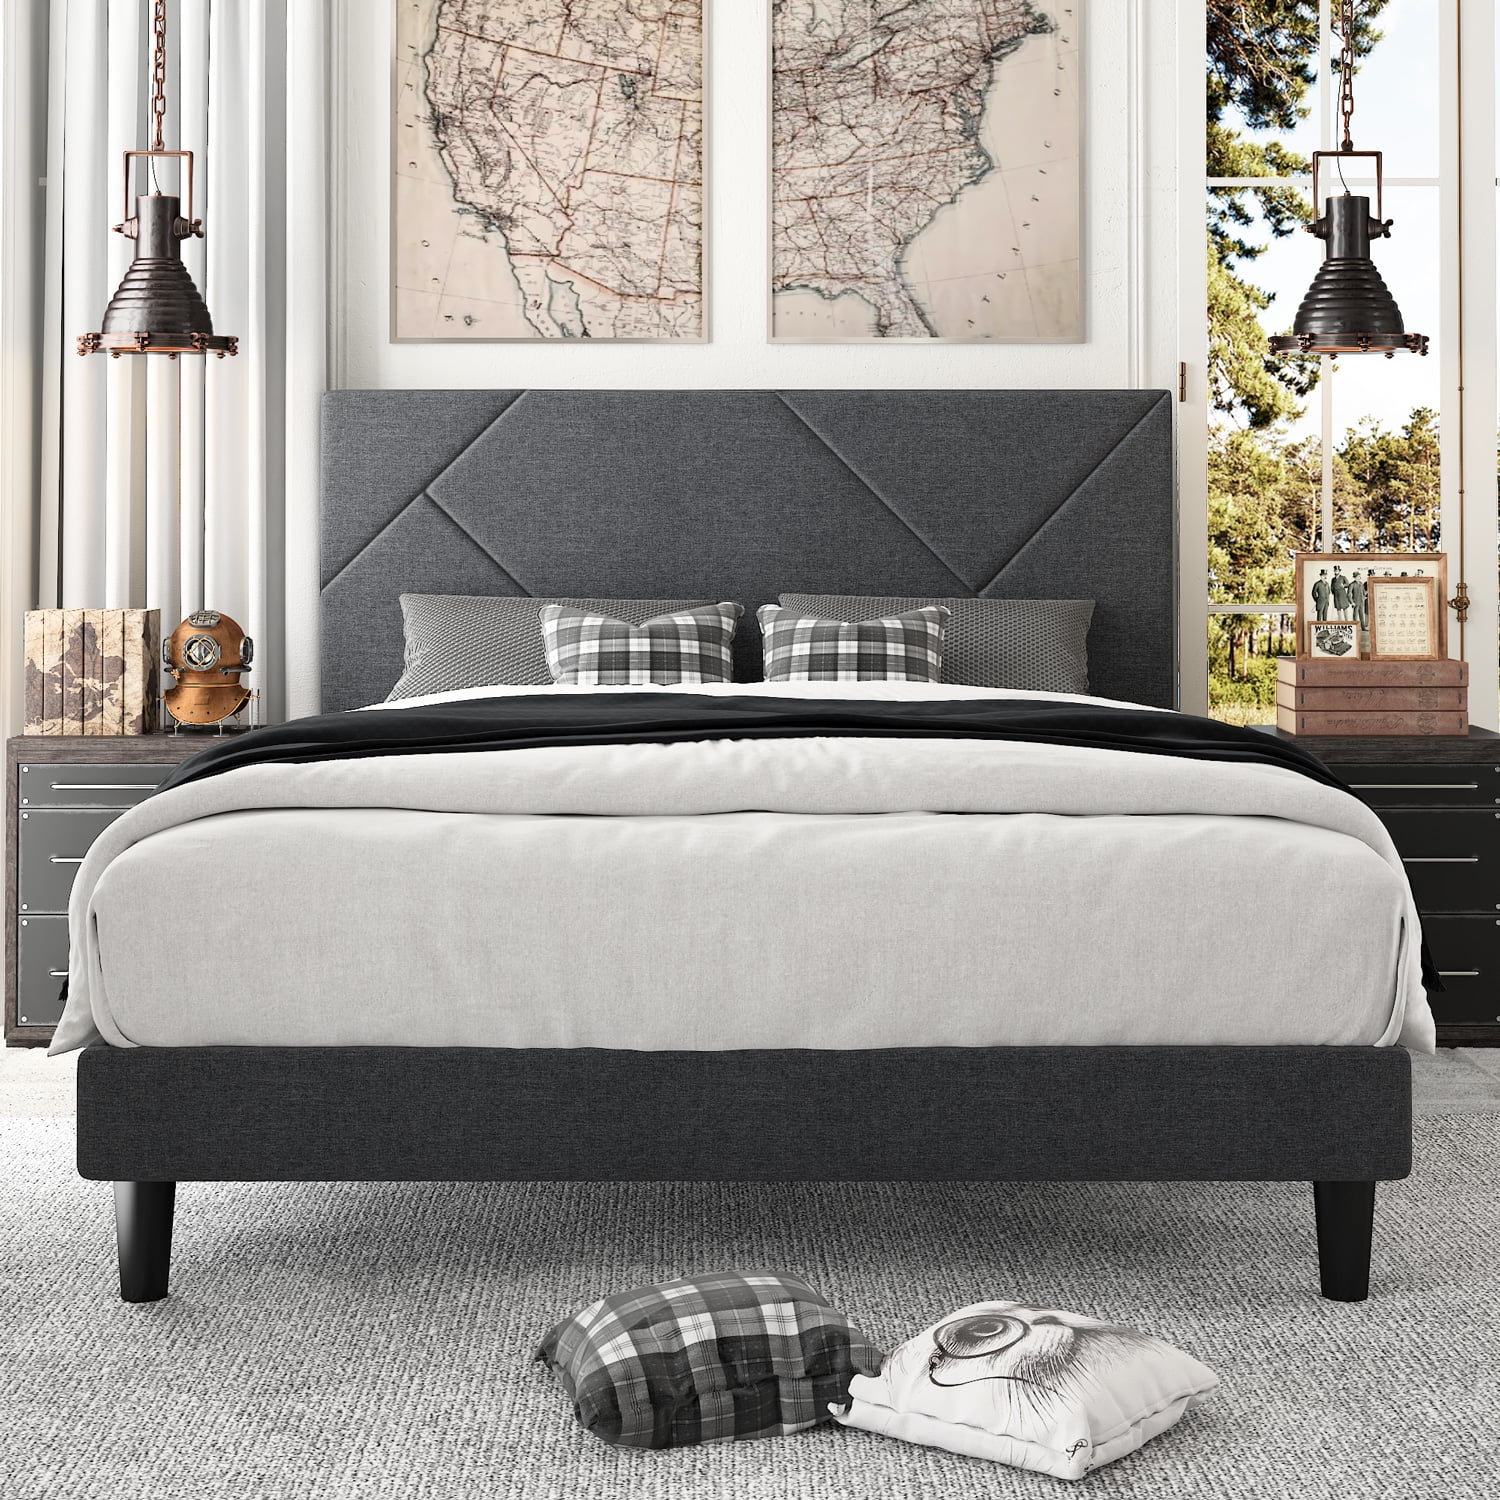 Amolife Full Size Metal Bed Frame With, Grey Upholstered Headboard And Frame